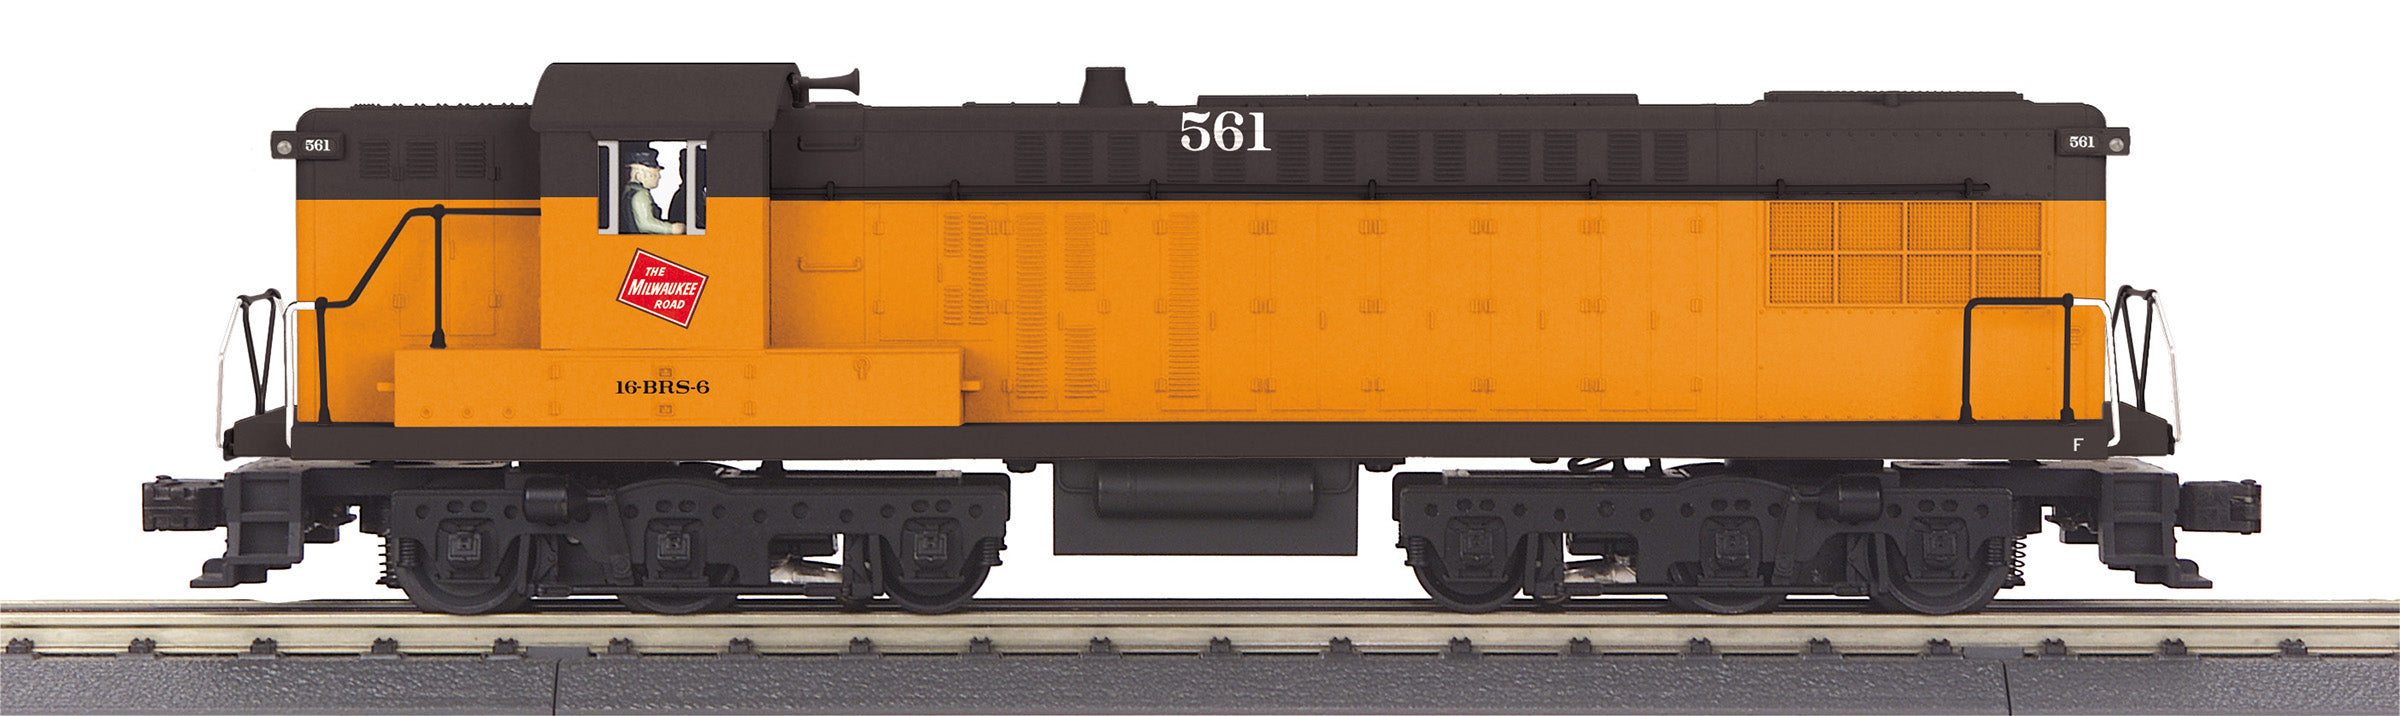 MTH 30-20890-1 - AS-616 Diesel Engine "Milwaukee Road" w/ PS3 #561 - Custom Run for MrMuffin'sTrains